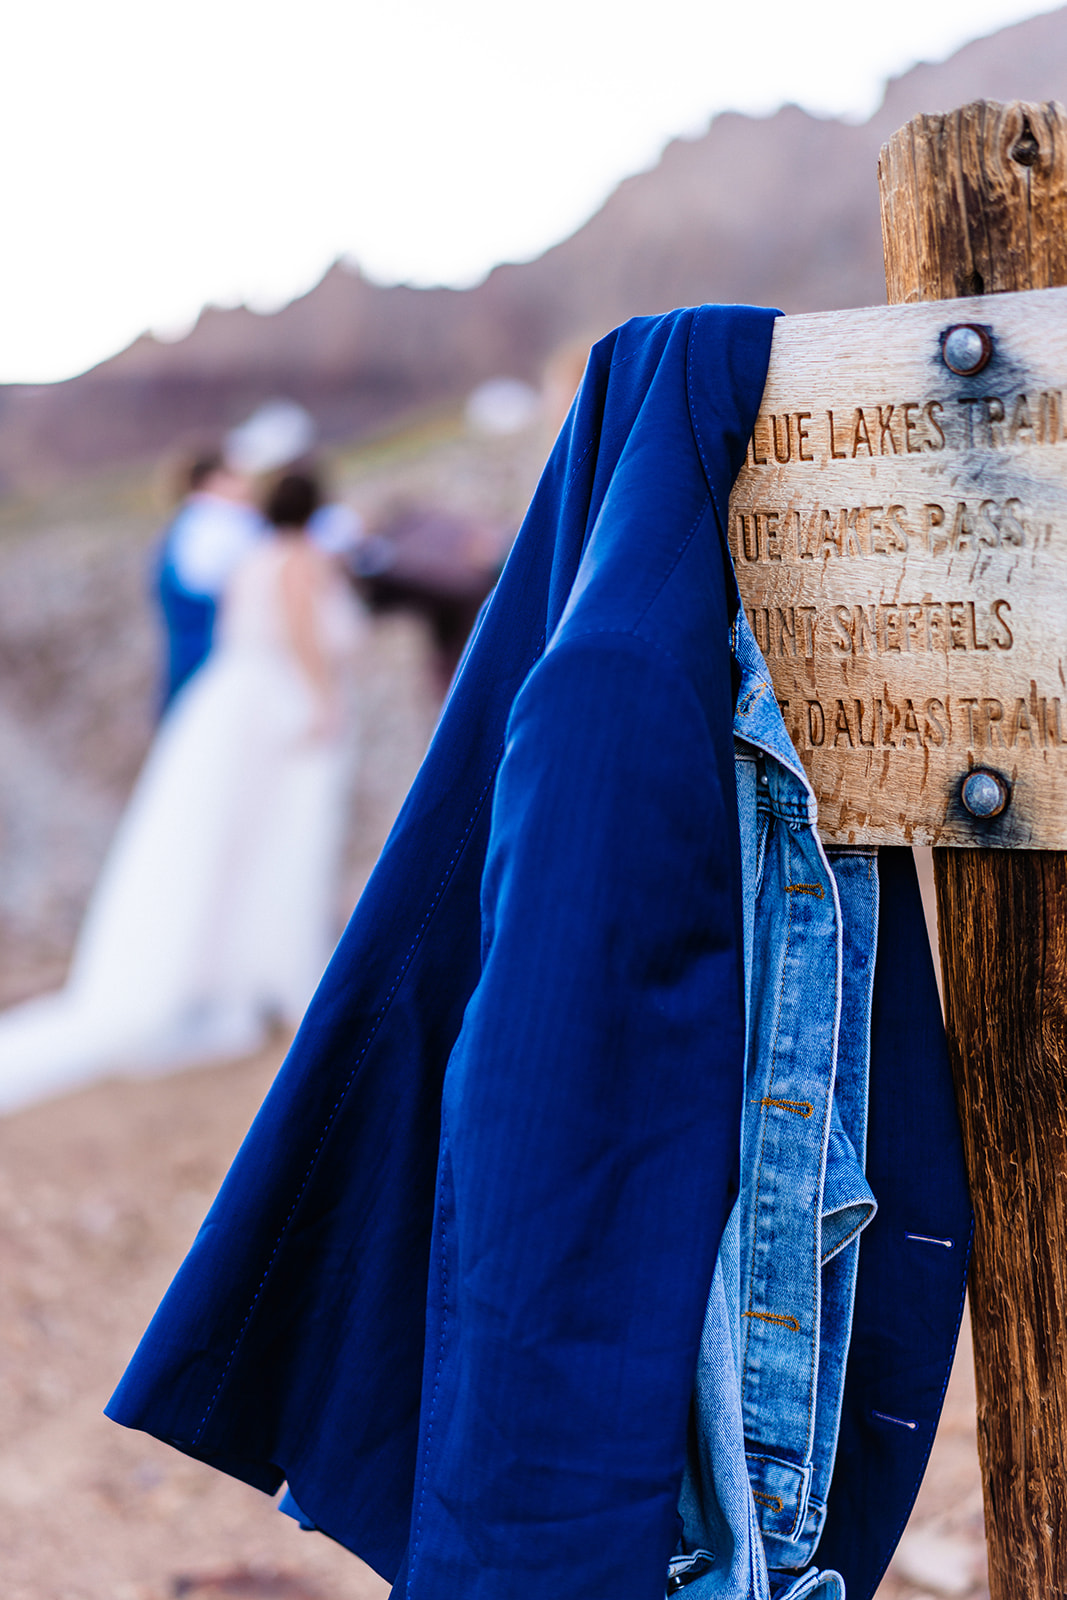 Blue Lakes sign with couples jackets hanging off